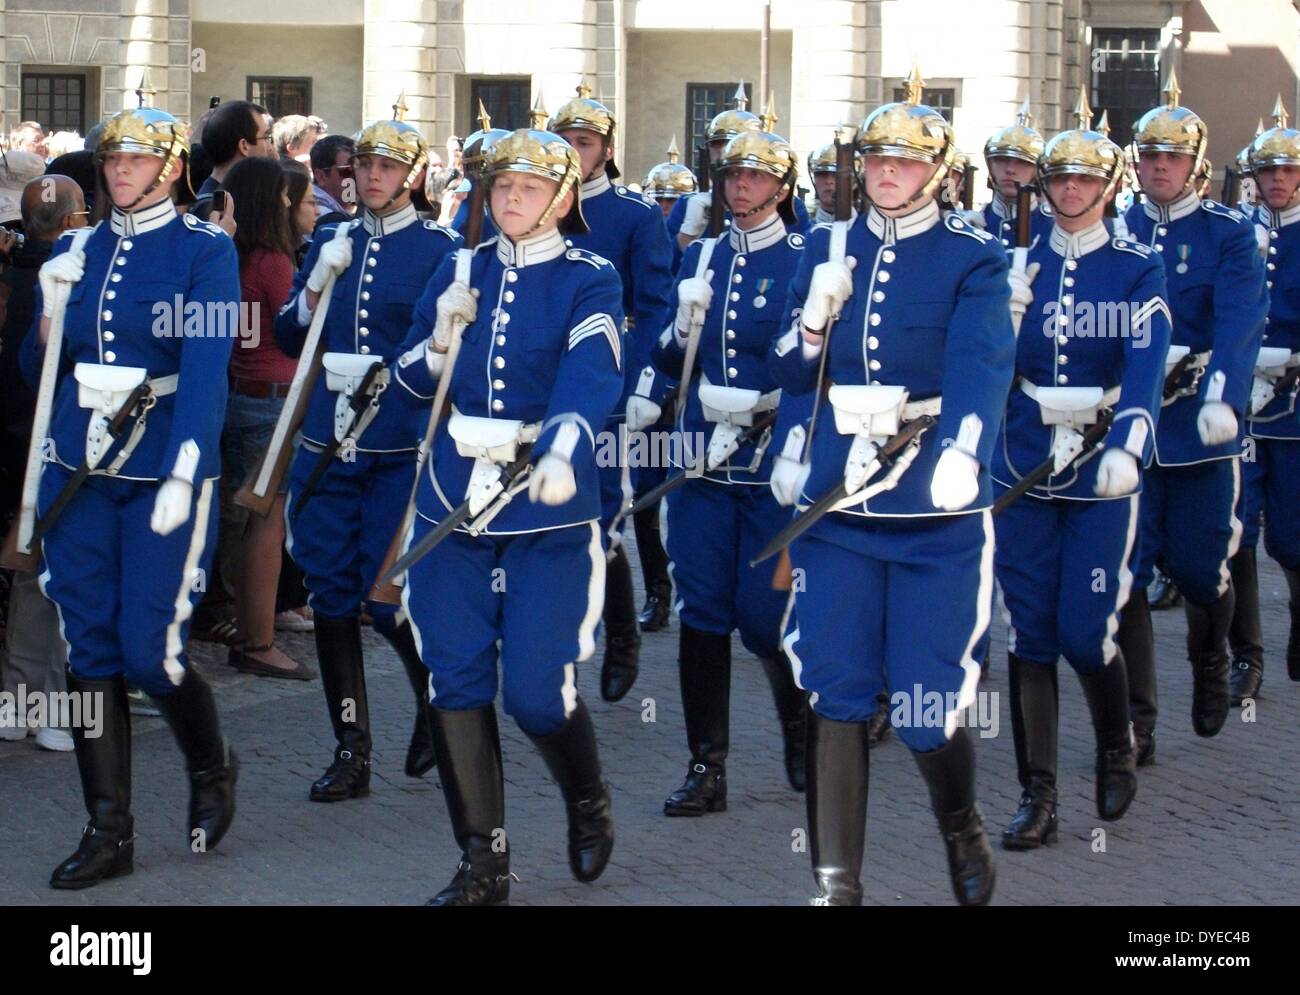 A military honour guard on parade at the Royal Palace in the city of Stockholm, Sweden. 2012-2017 Stock Photo